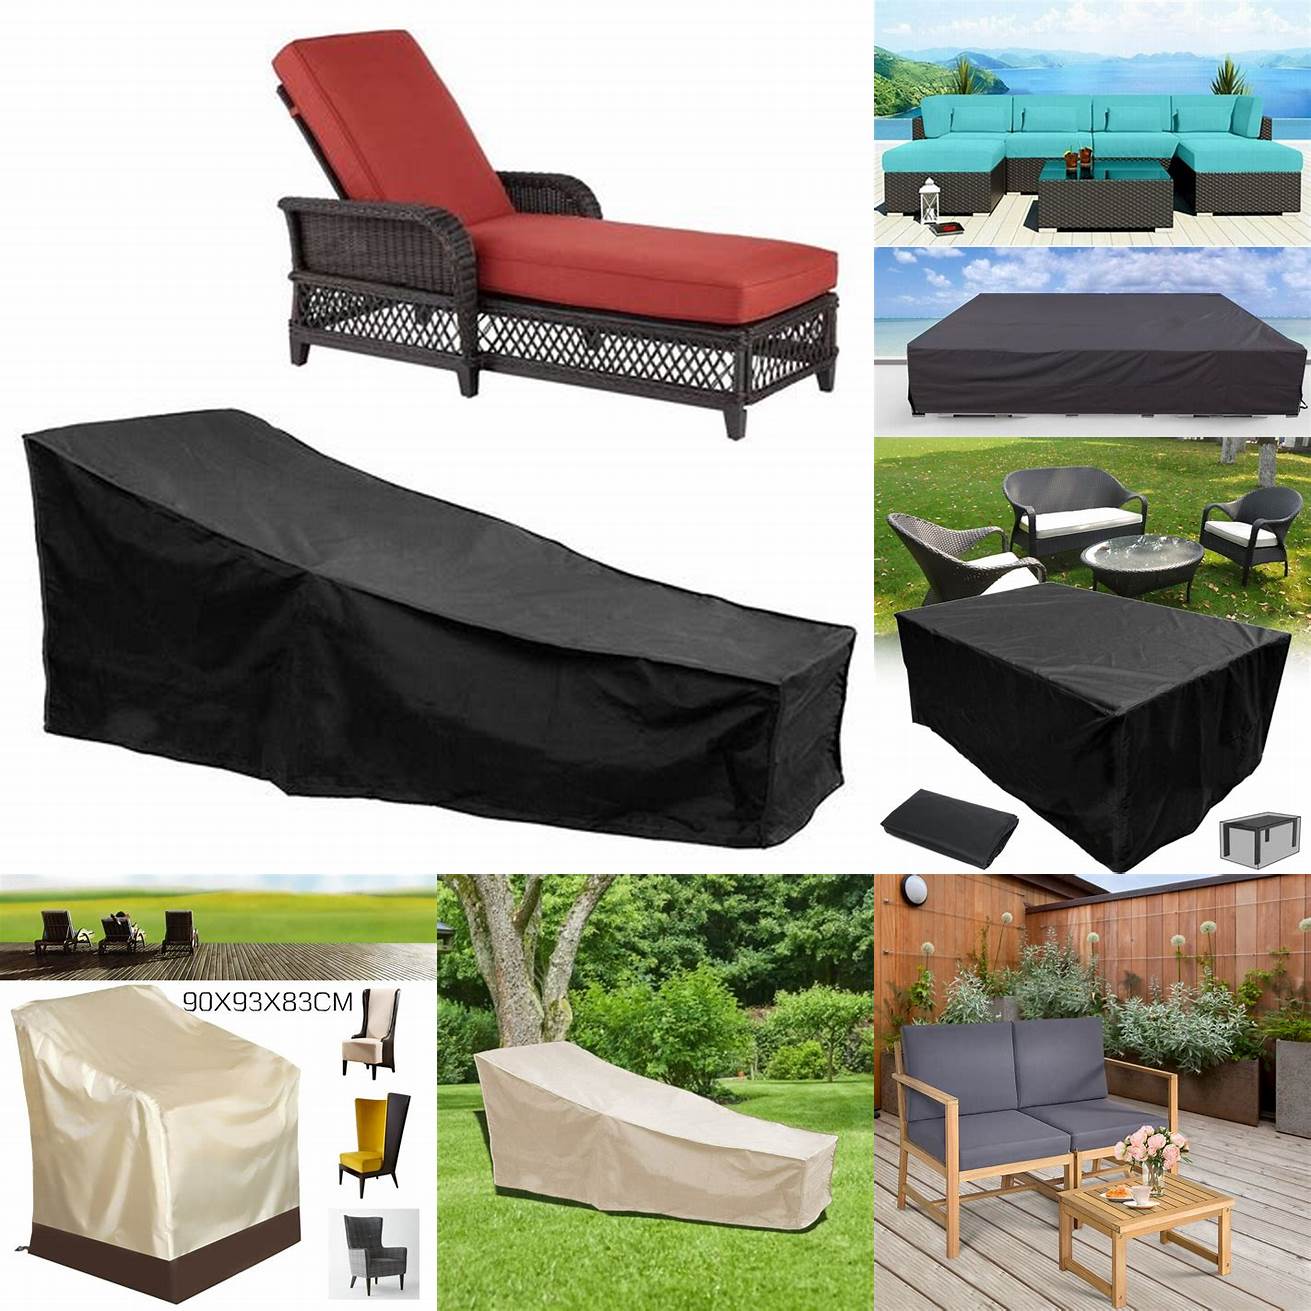 Examples of outdoor furniture protection products